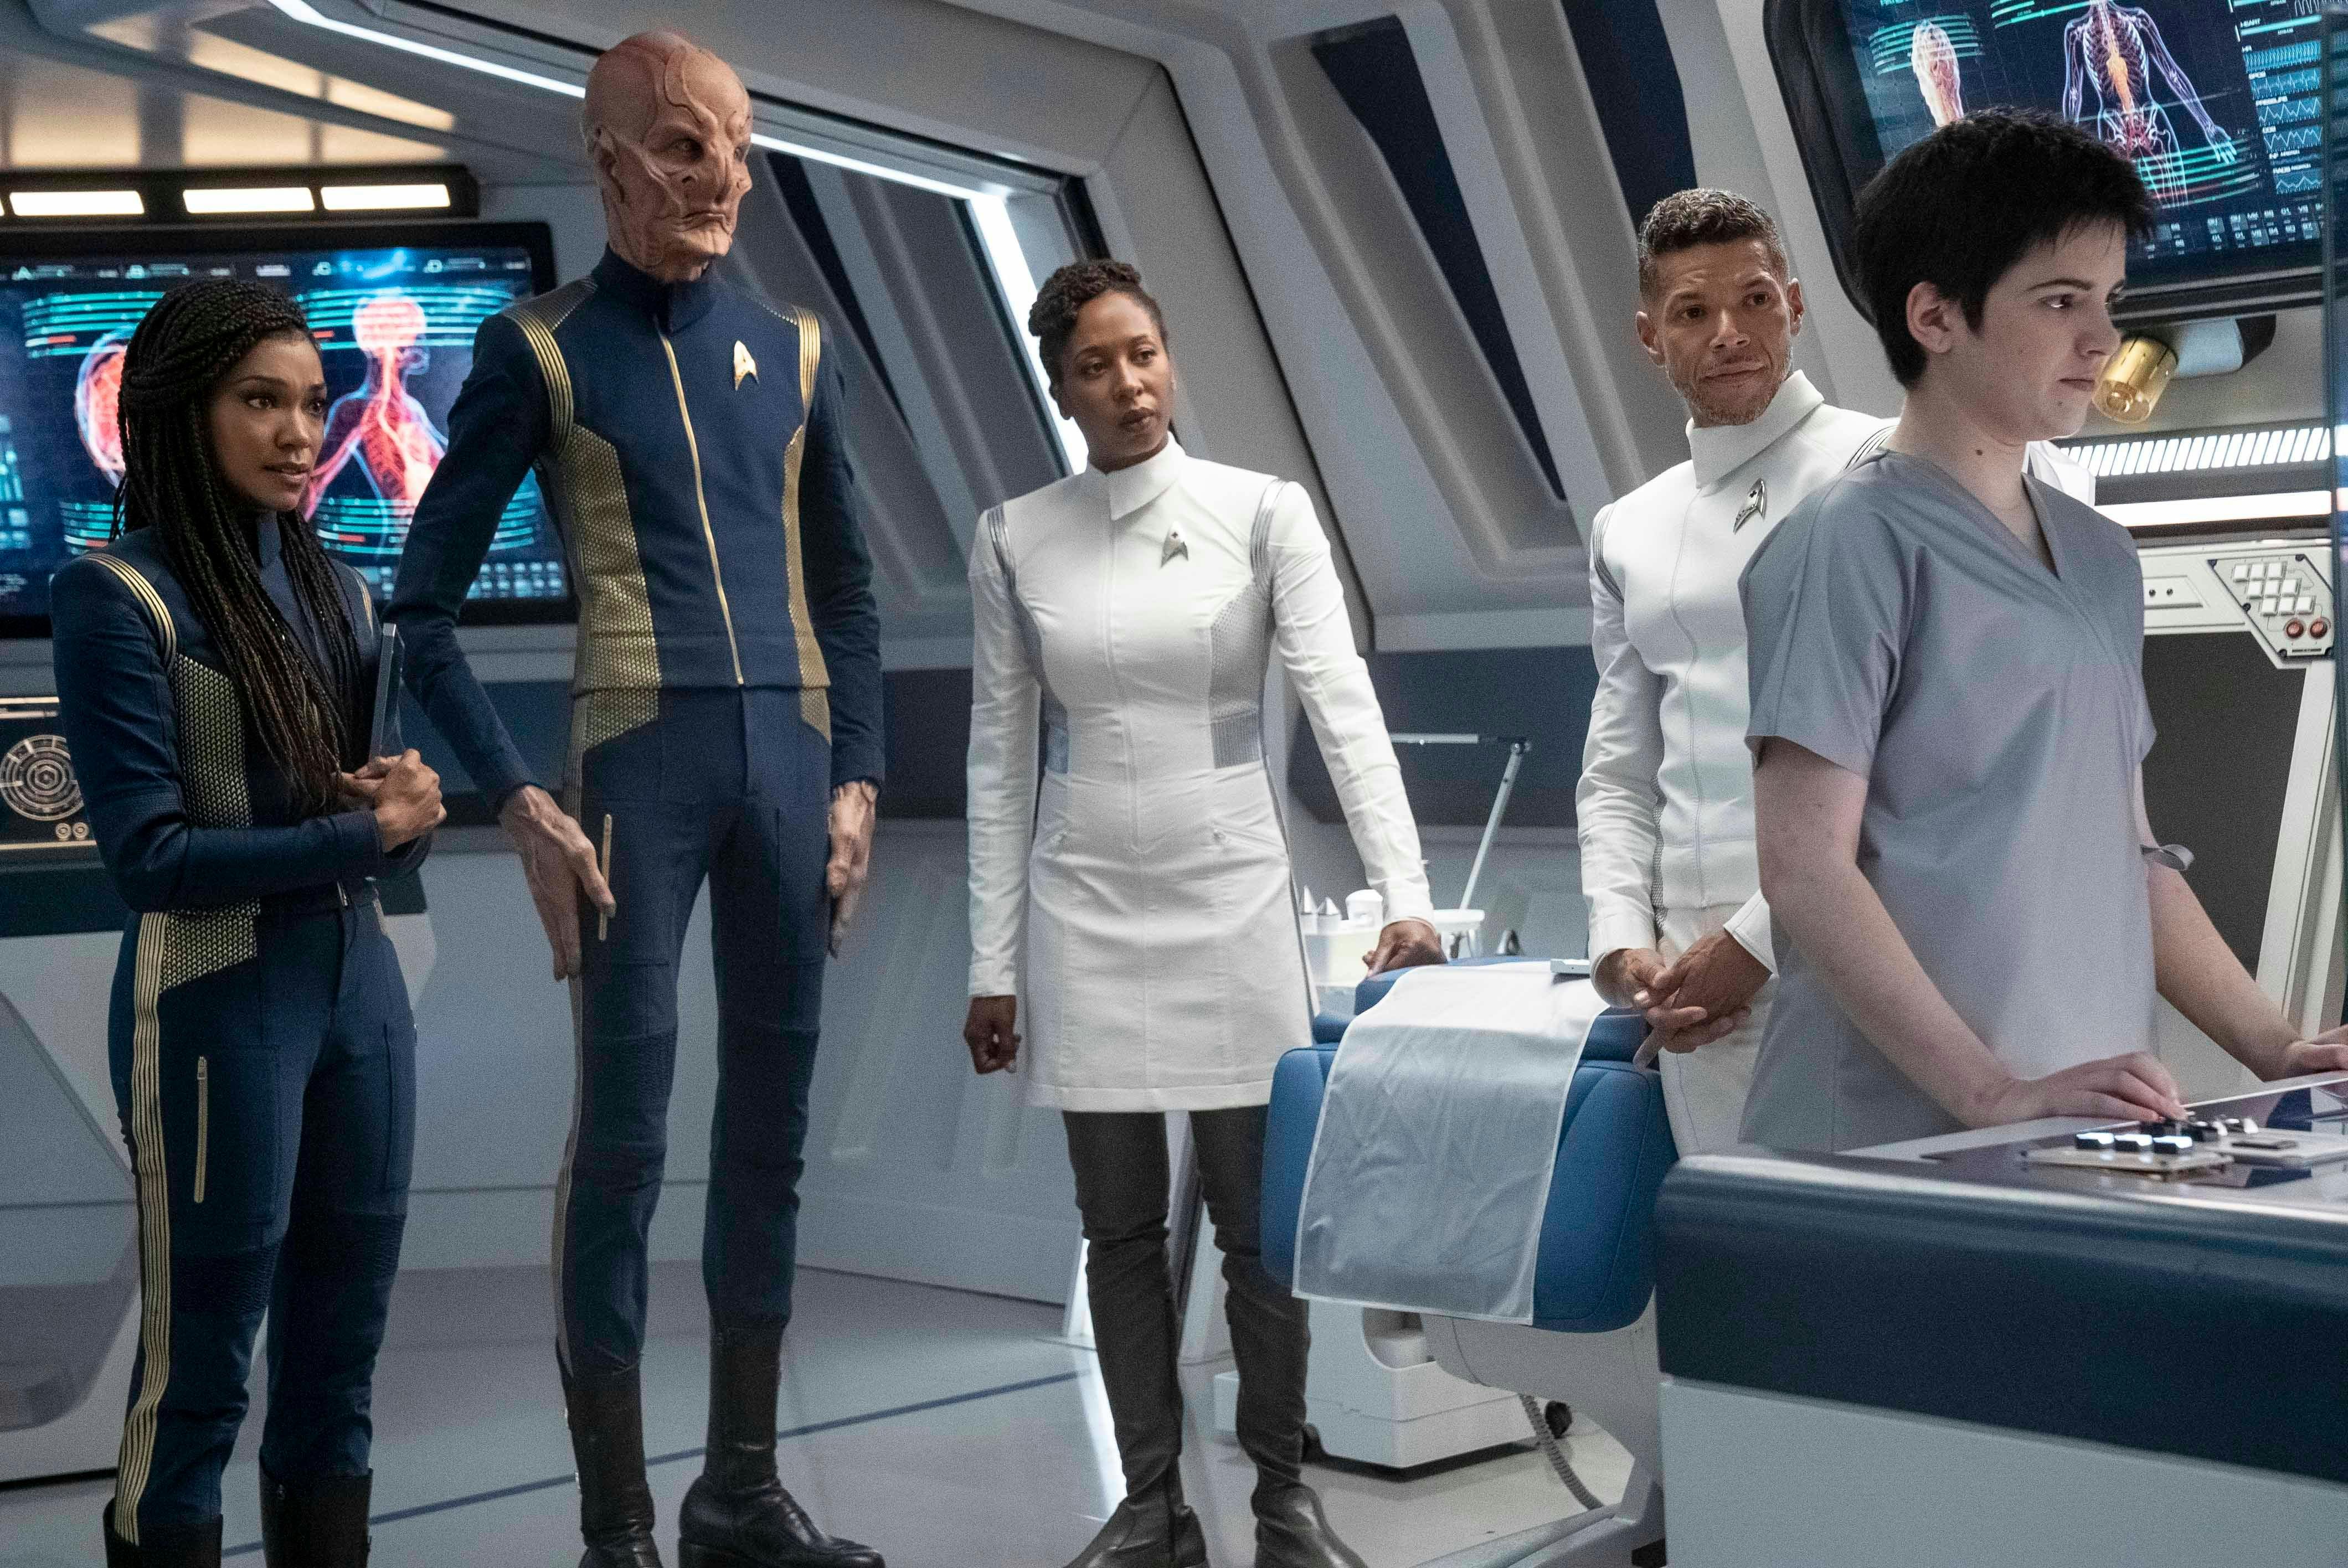 Star Trek: Discovery - "Forget Me Not"